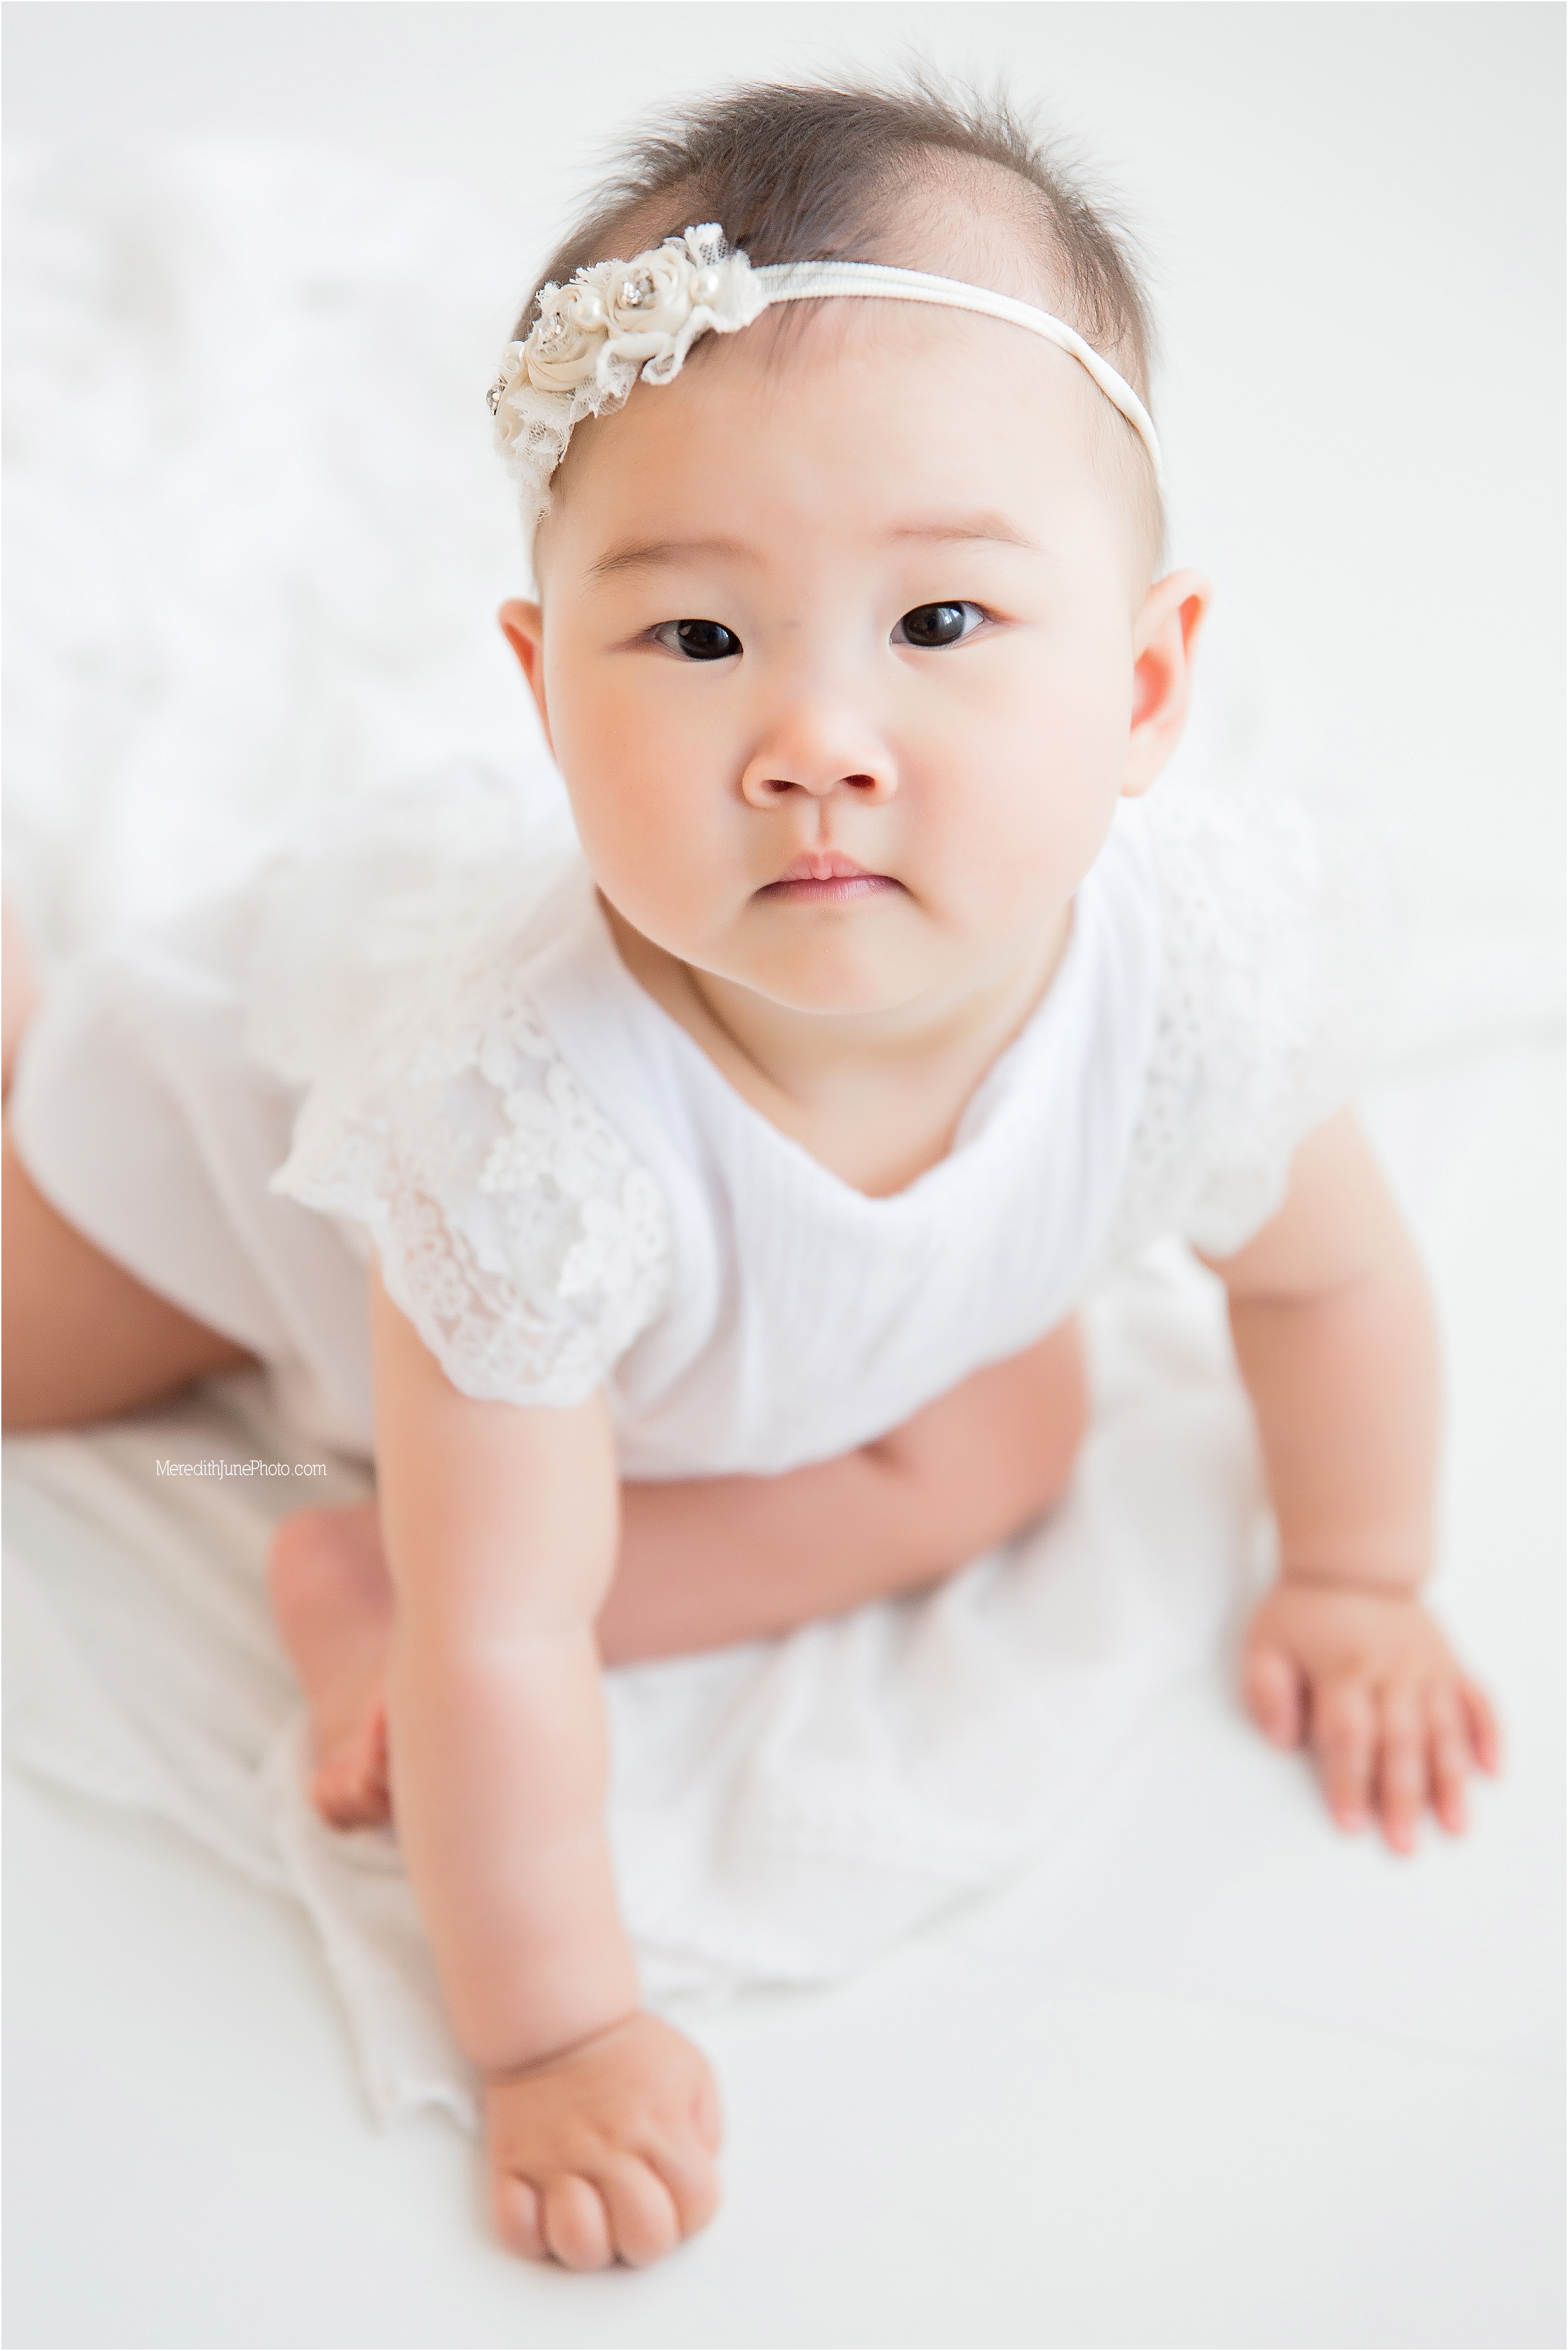 7 month photo session with beautiful baby in studio